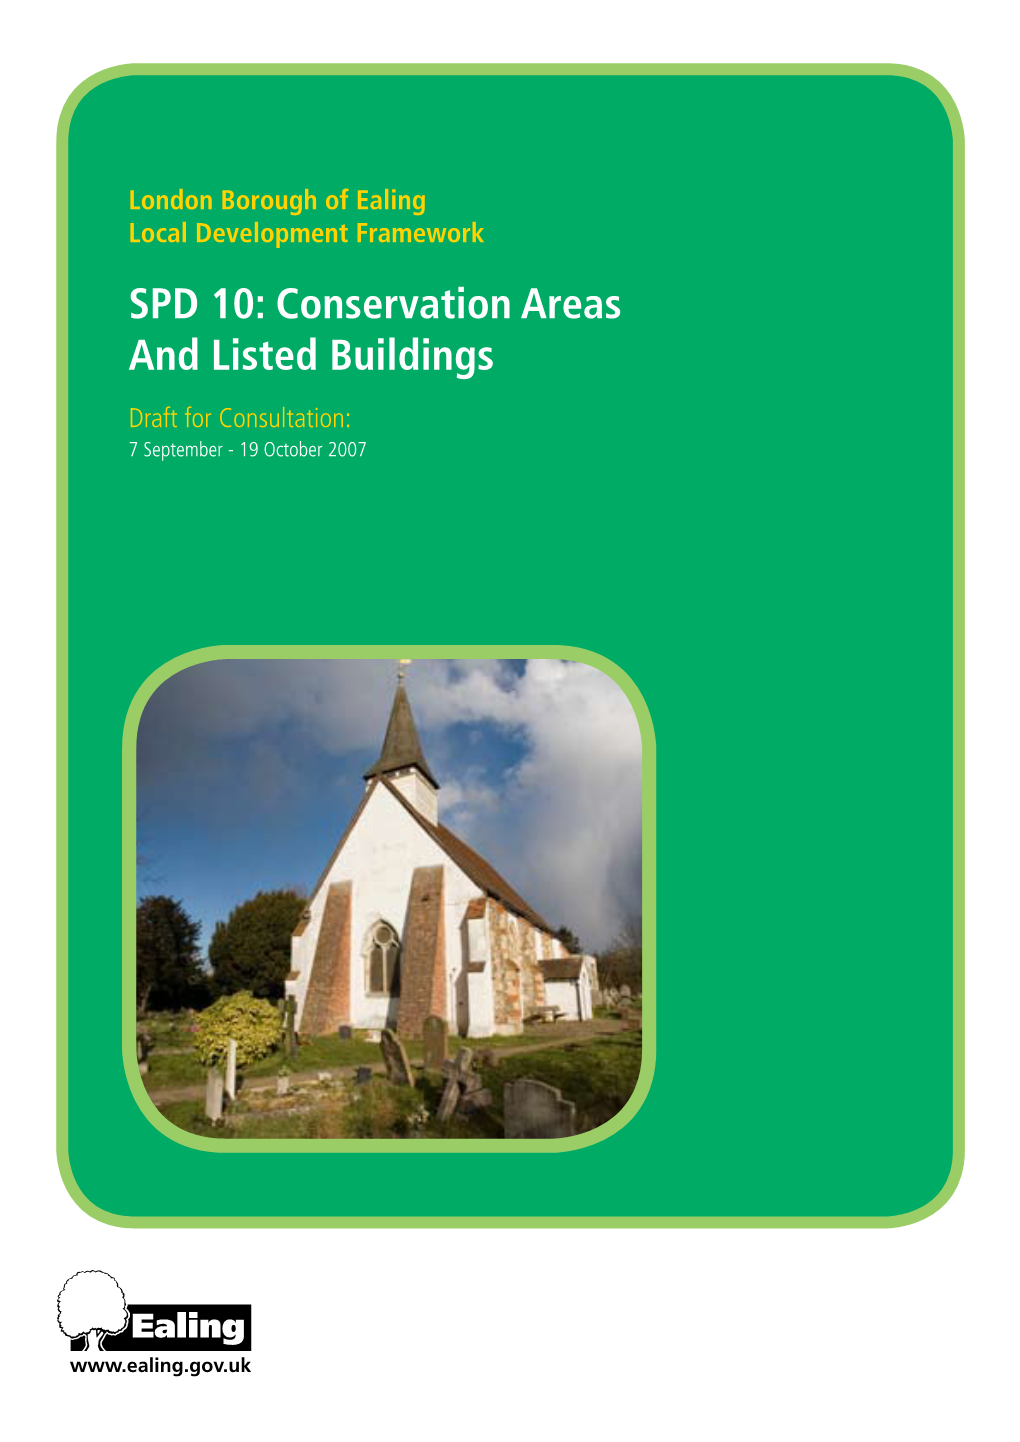 SPD 10: Conservation Areas and Listed Buildings Draft for Consultation: 7 September - 19 October 2007